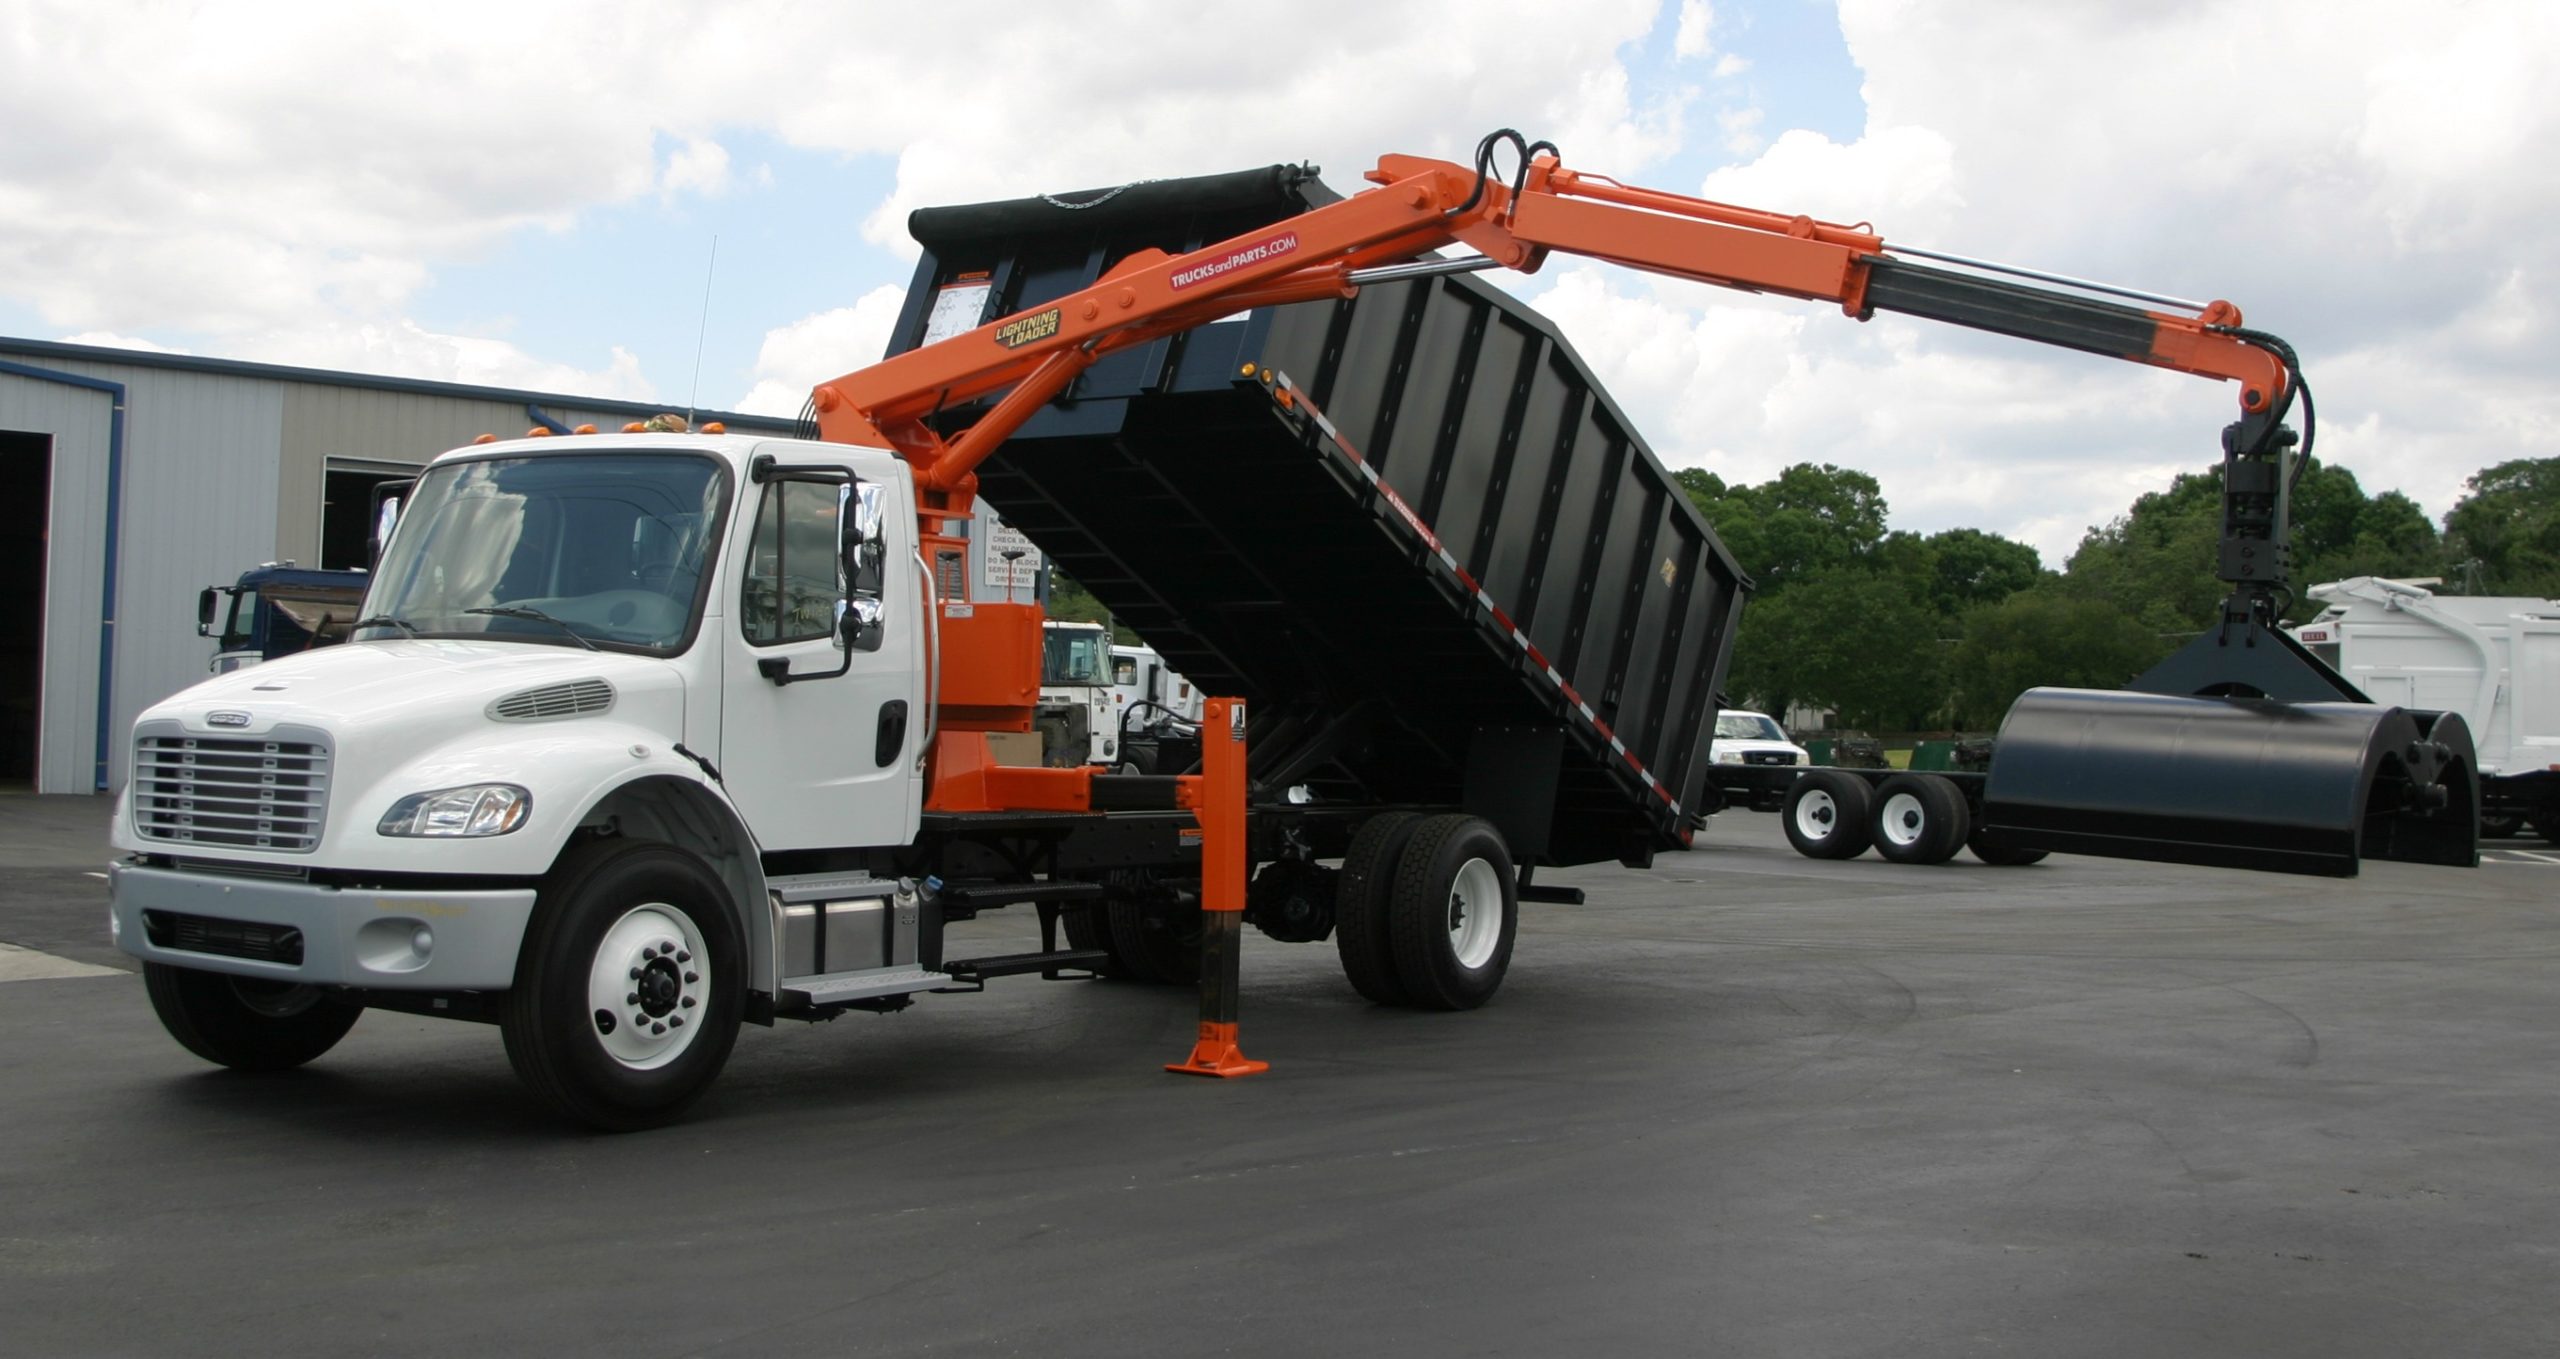 Is It Good To Buy Garbage Trucks Which Are For Sale?